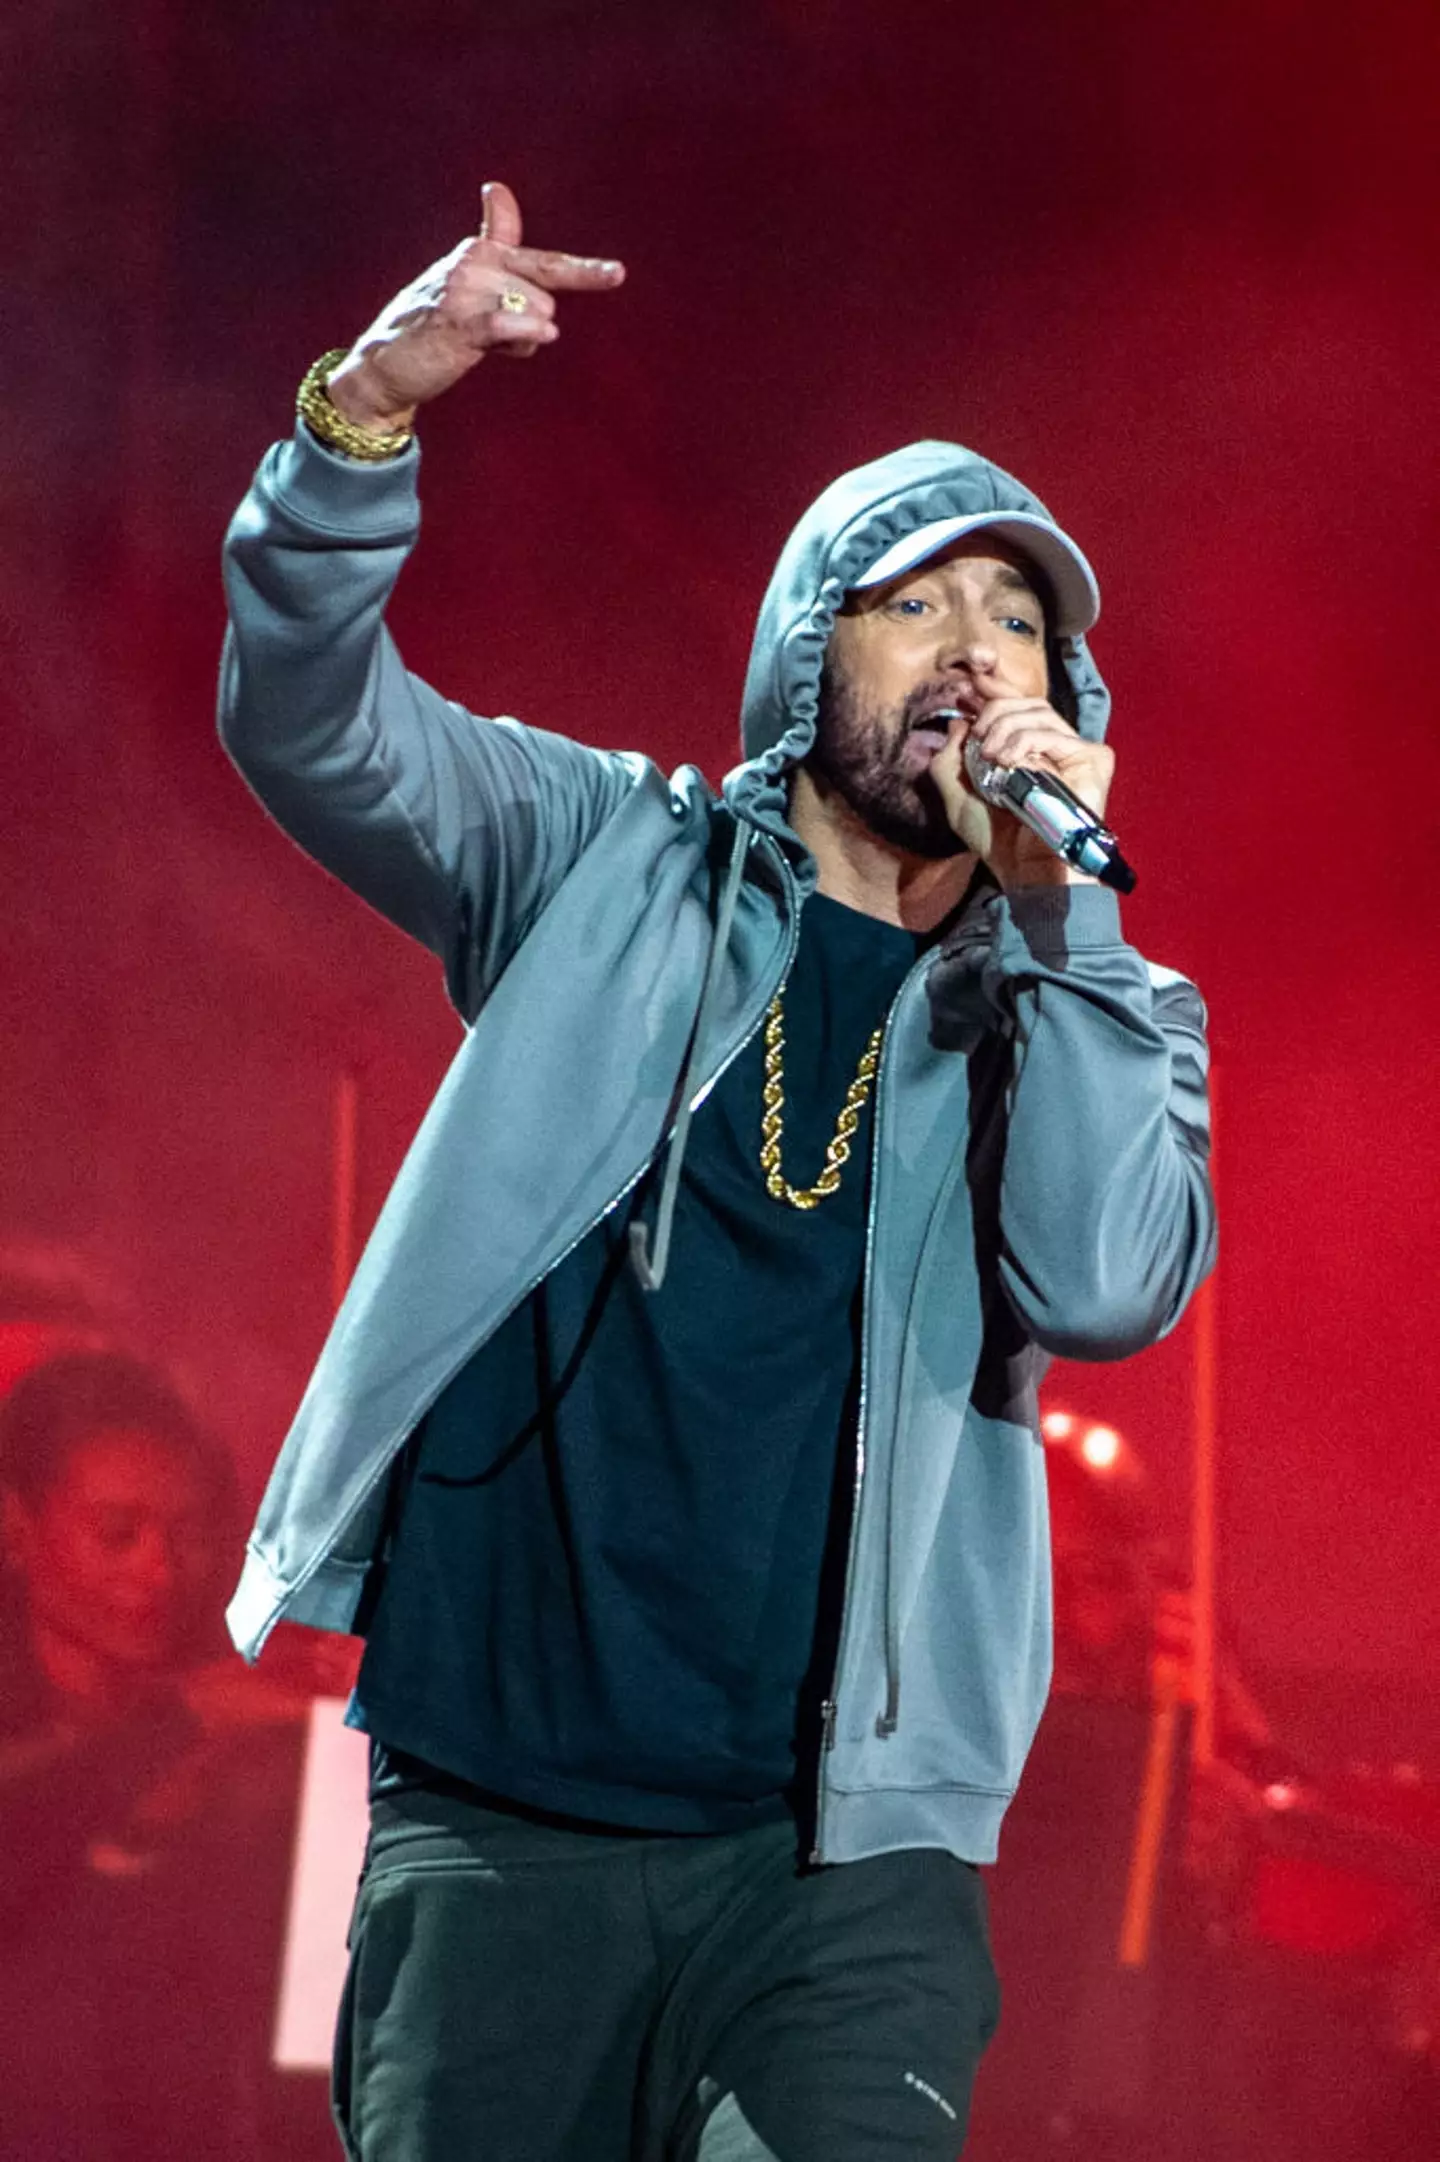 Eminem released his new album The Death of Slim Shady last week (July 12). (Aaron J. Thornton / Contributor / Getty Images)